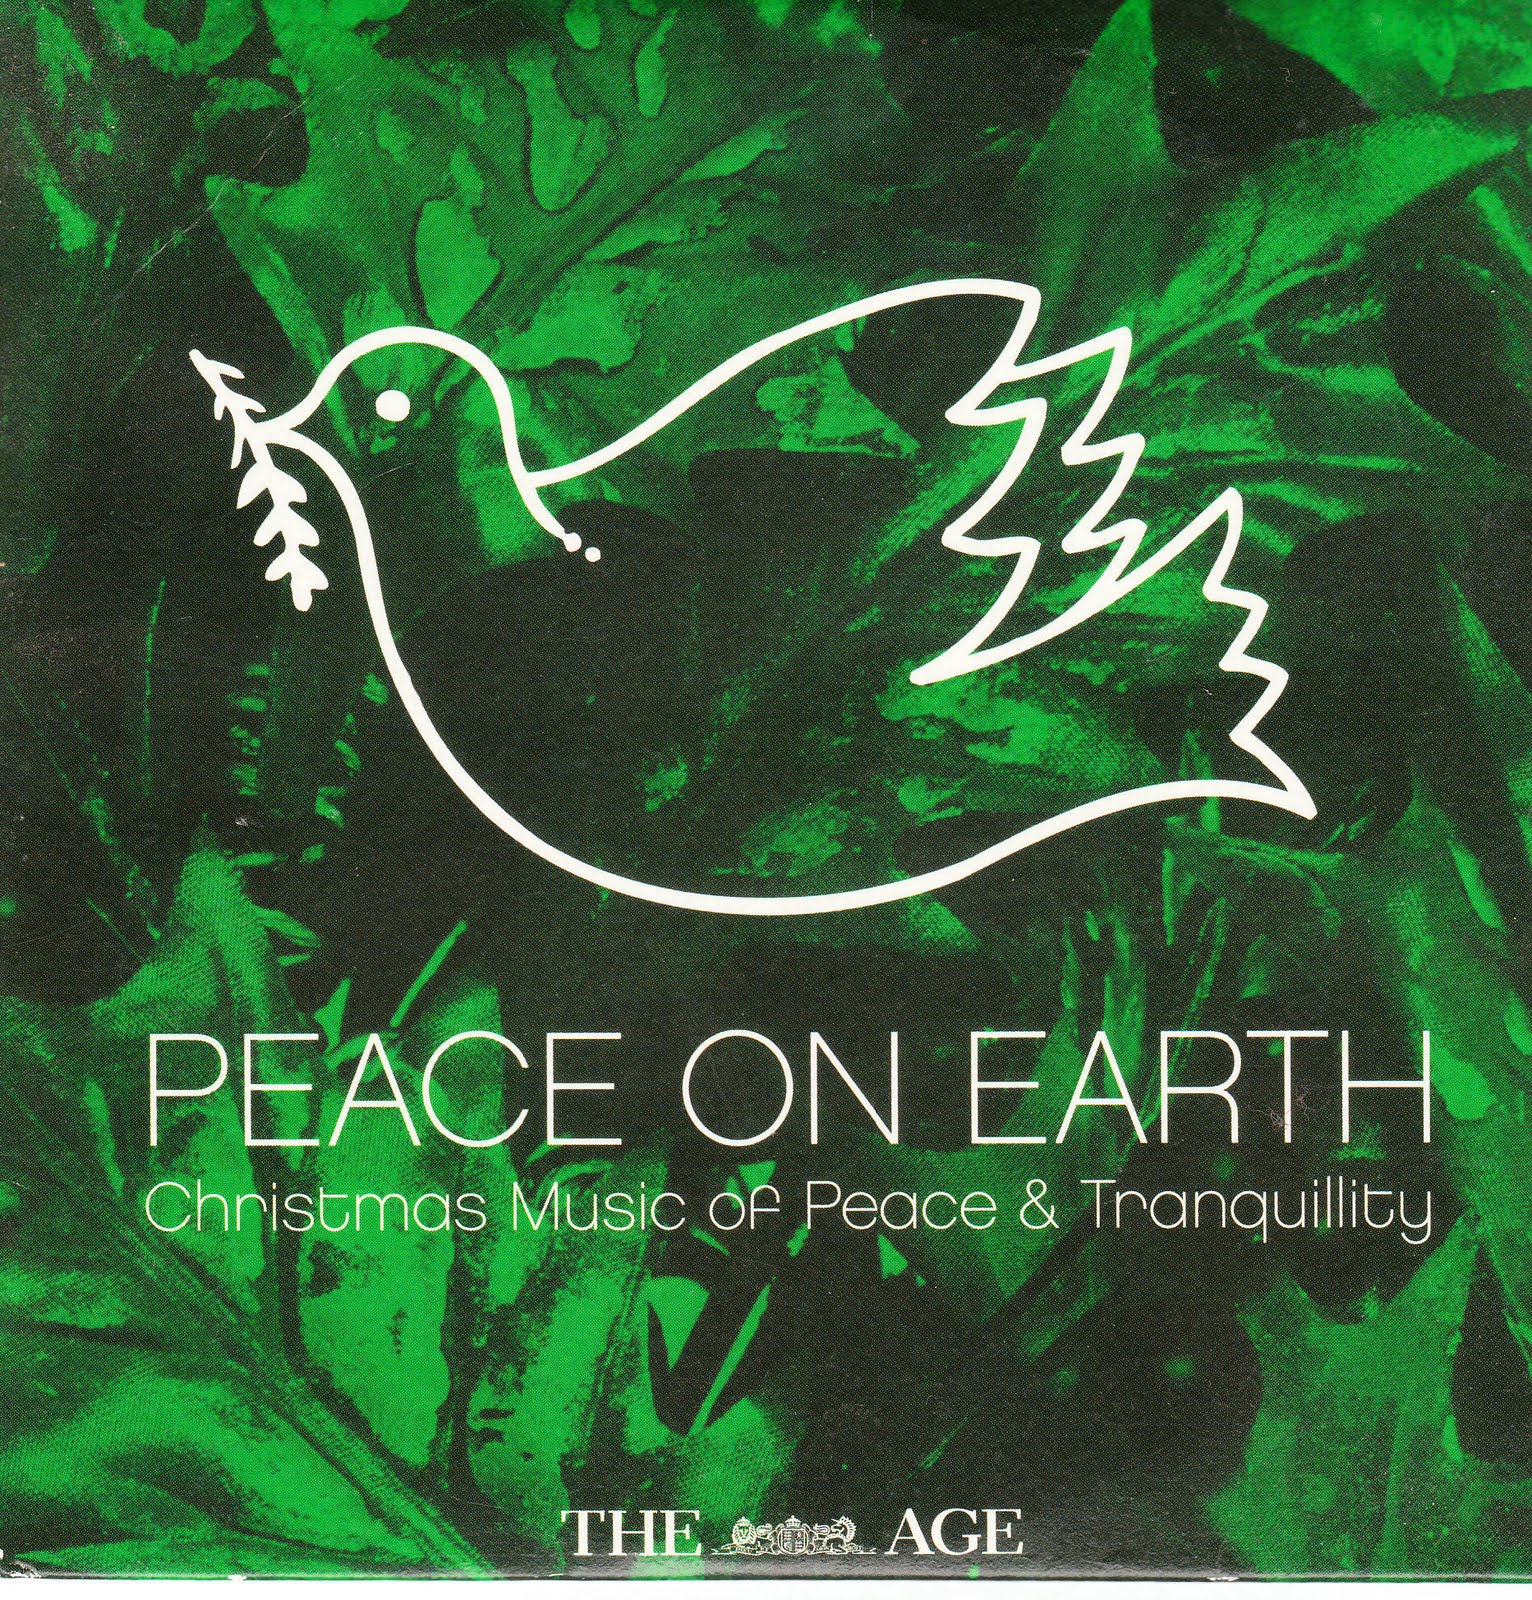 By Cantillation On The Compilation Cd Peace On Earth  Pictured At